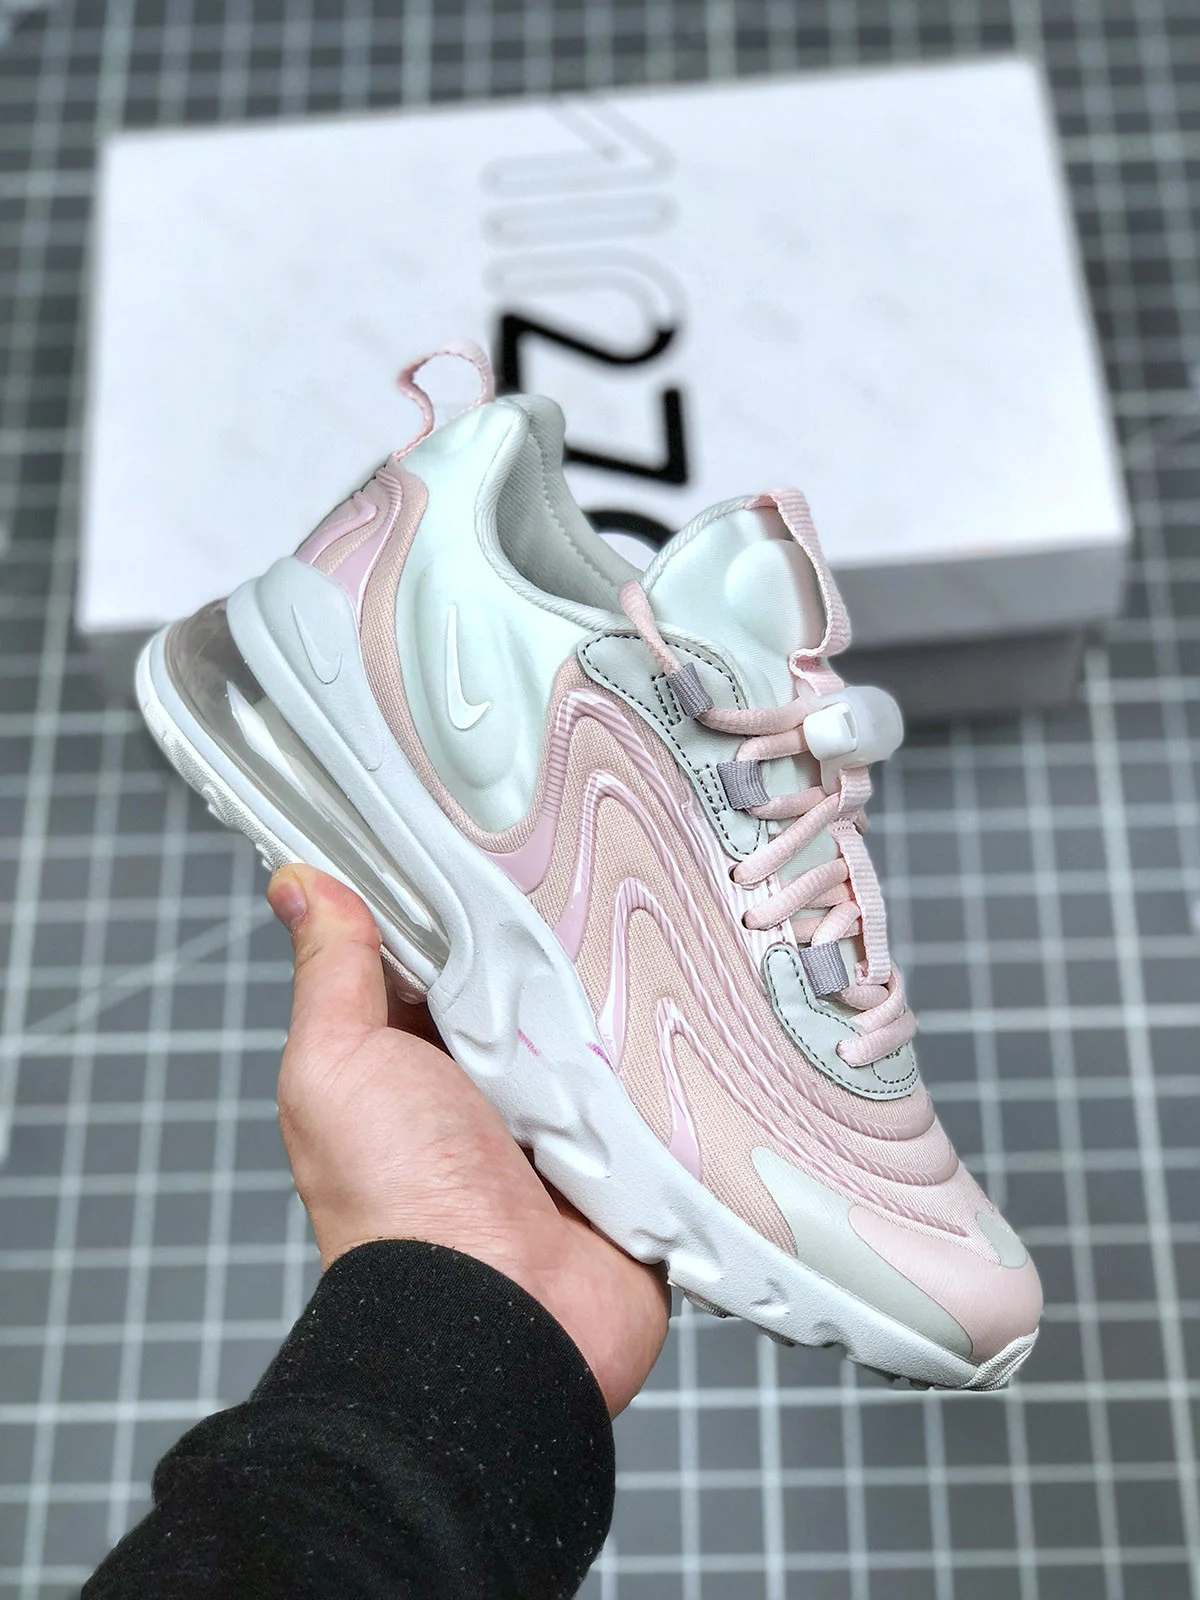 Nike WMNS Air Max 270 React ENG Barely RoseFor Sale